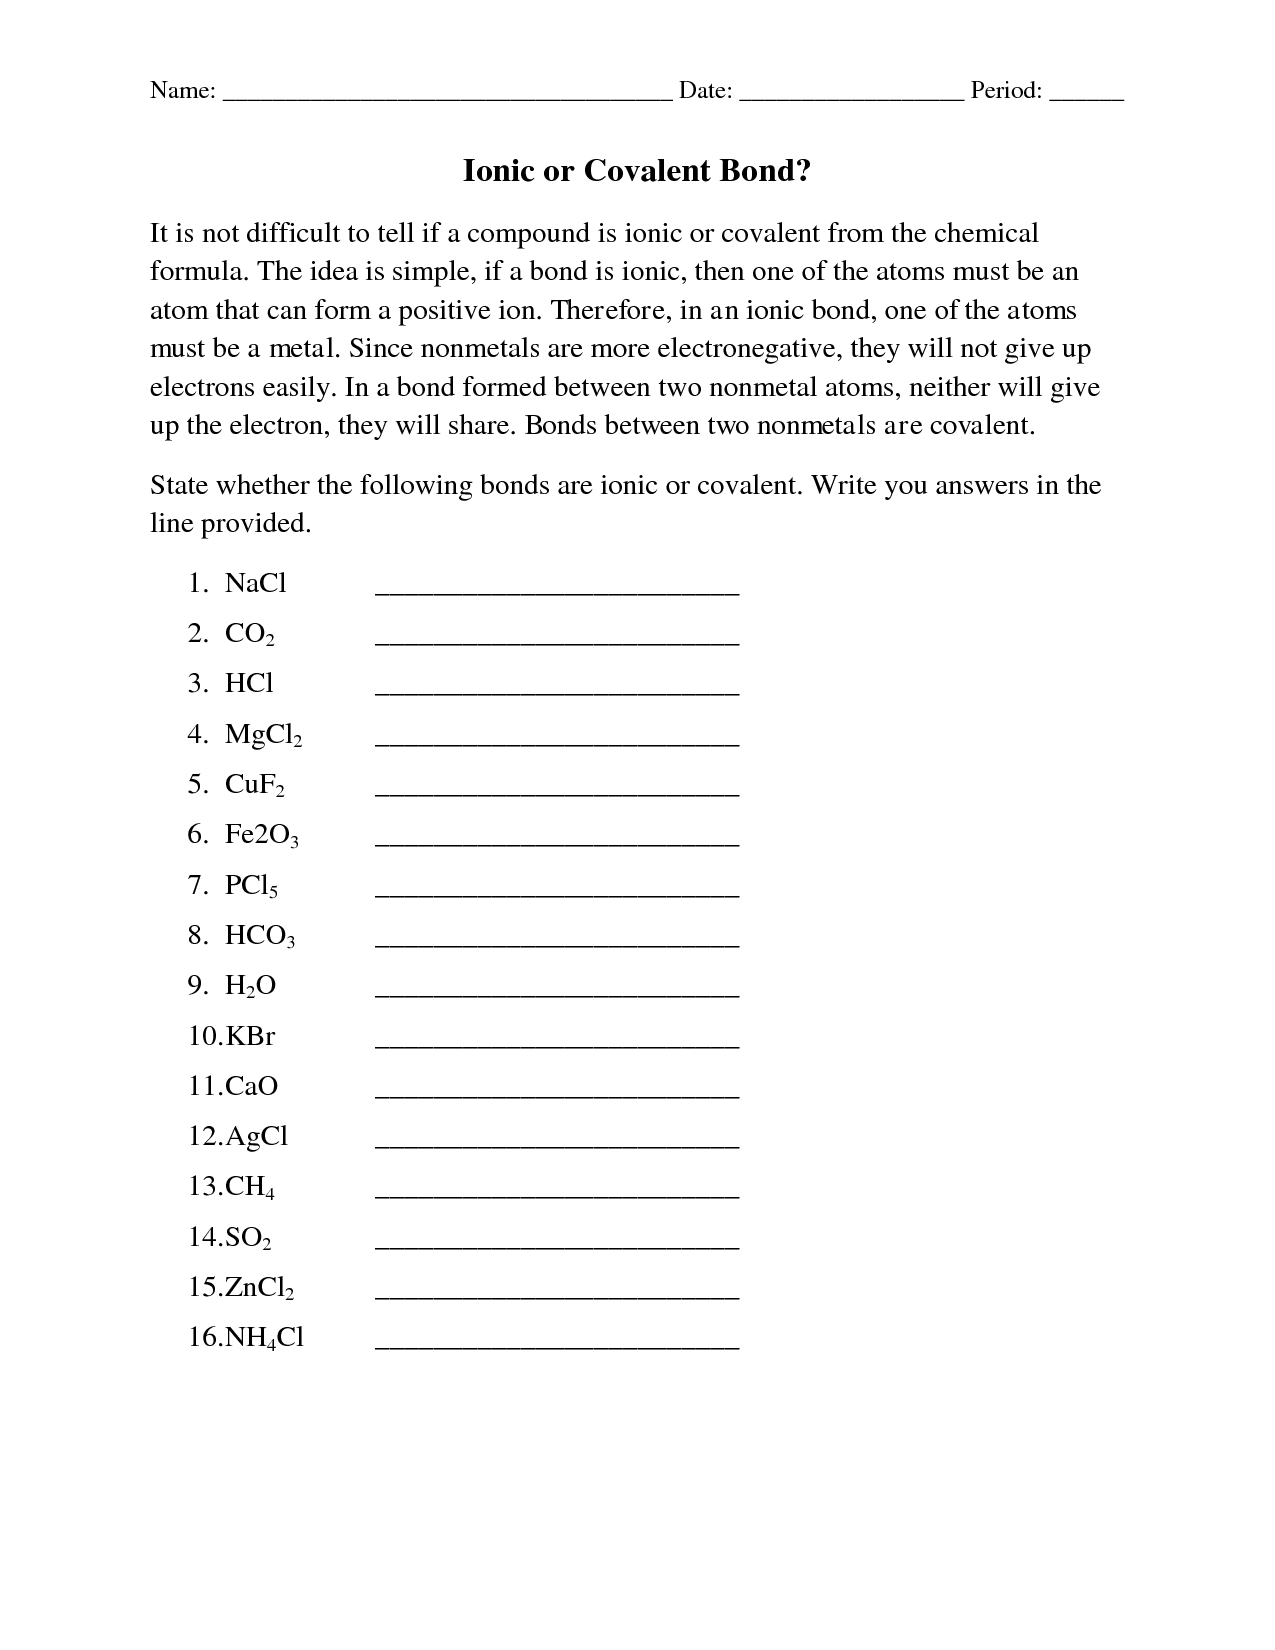 10-best-images-of-ionic-and-covalent-compounds-worksheet-naming-ionic-compounds-worksheet-one